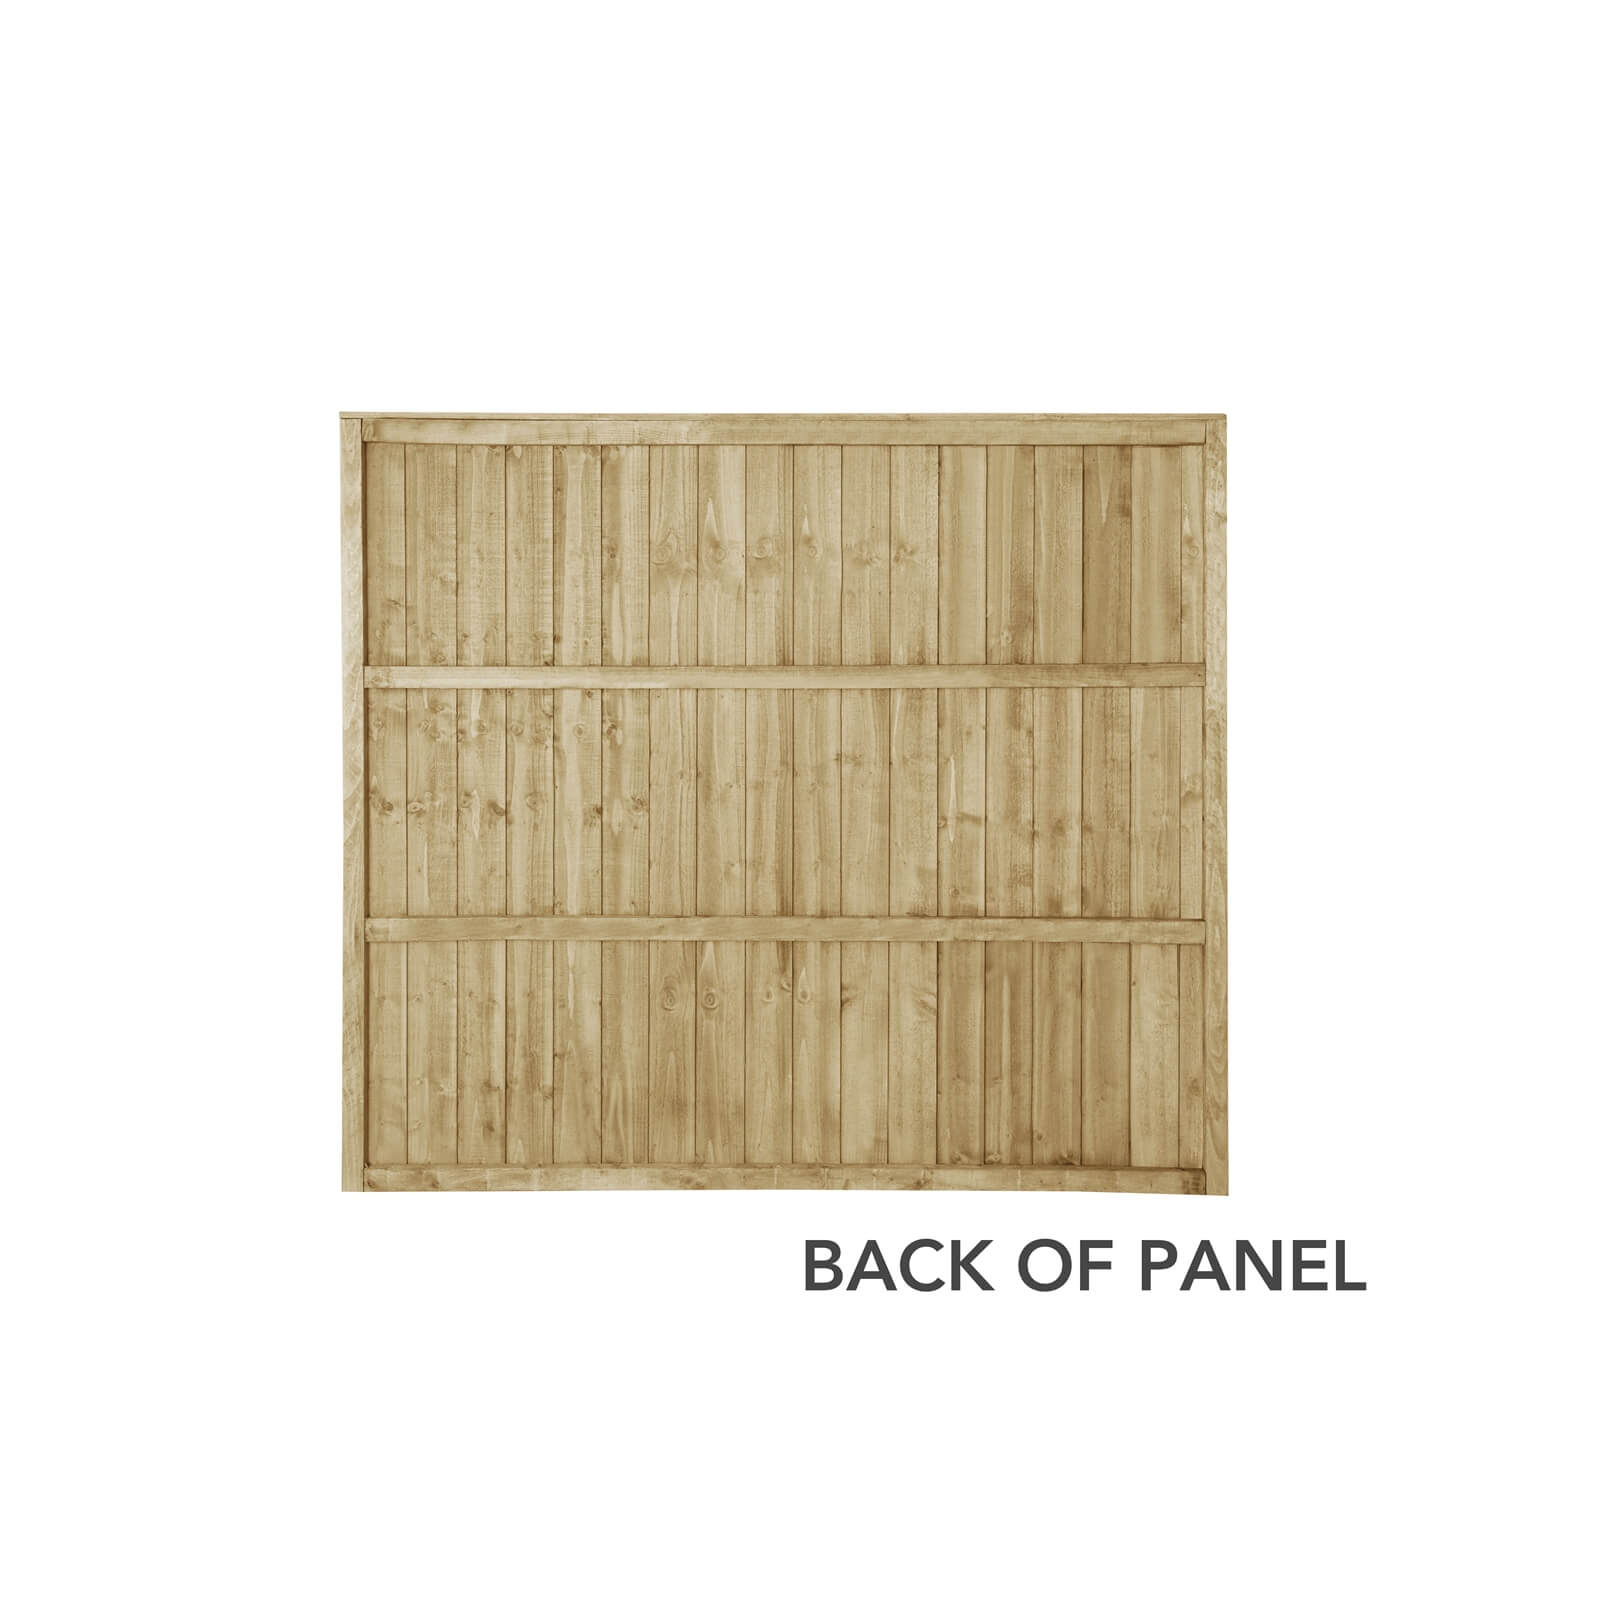 6ft x 5ft (1.83m x 1.54m) Pressure Treated Featheredge Fence Panel - Pack of 5